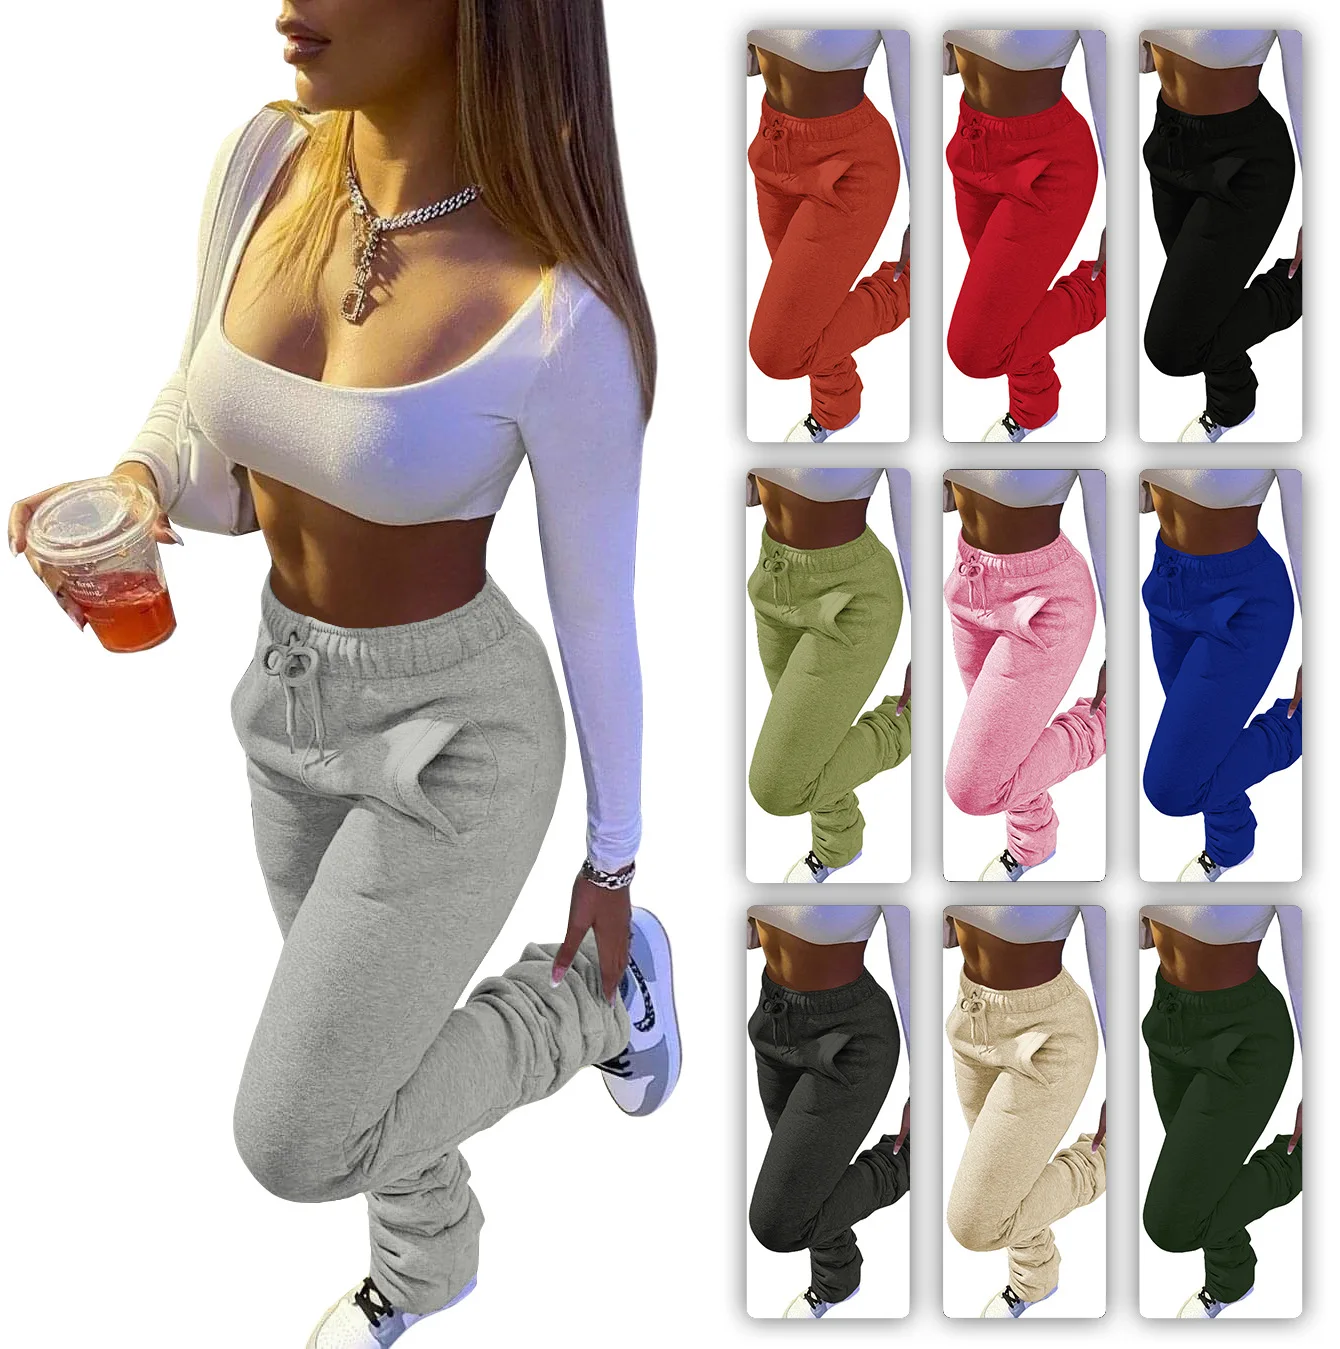 

New Arrivals High Waist Solid Color Thick Pants Legging Women Winter sweatpants woman Trousers Stacked Pants, White, yellow, gray, green, black, pink, blue